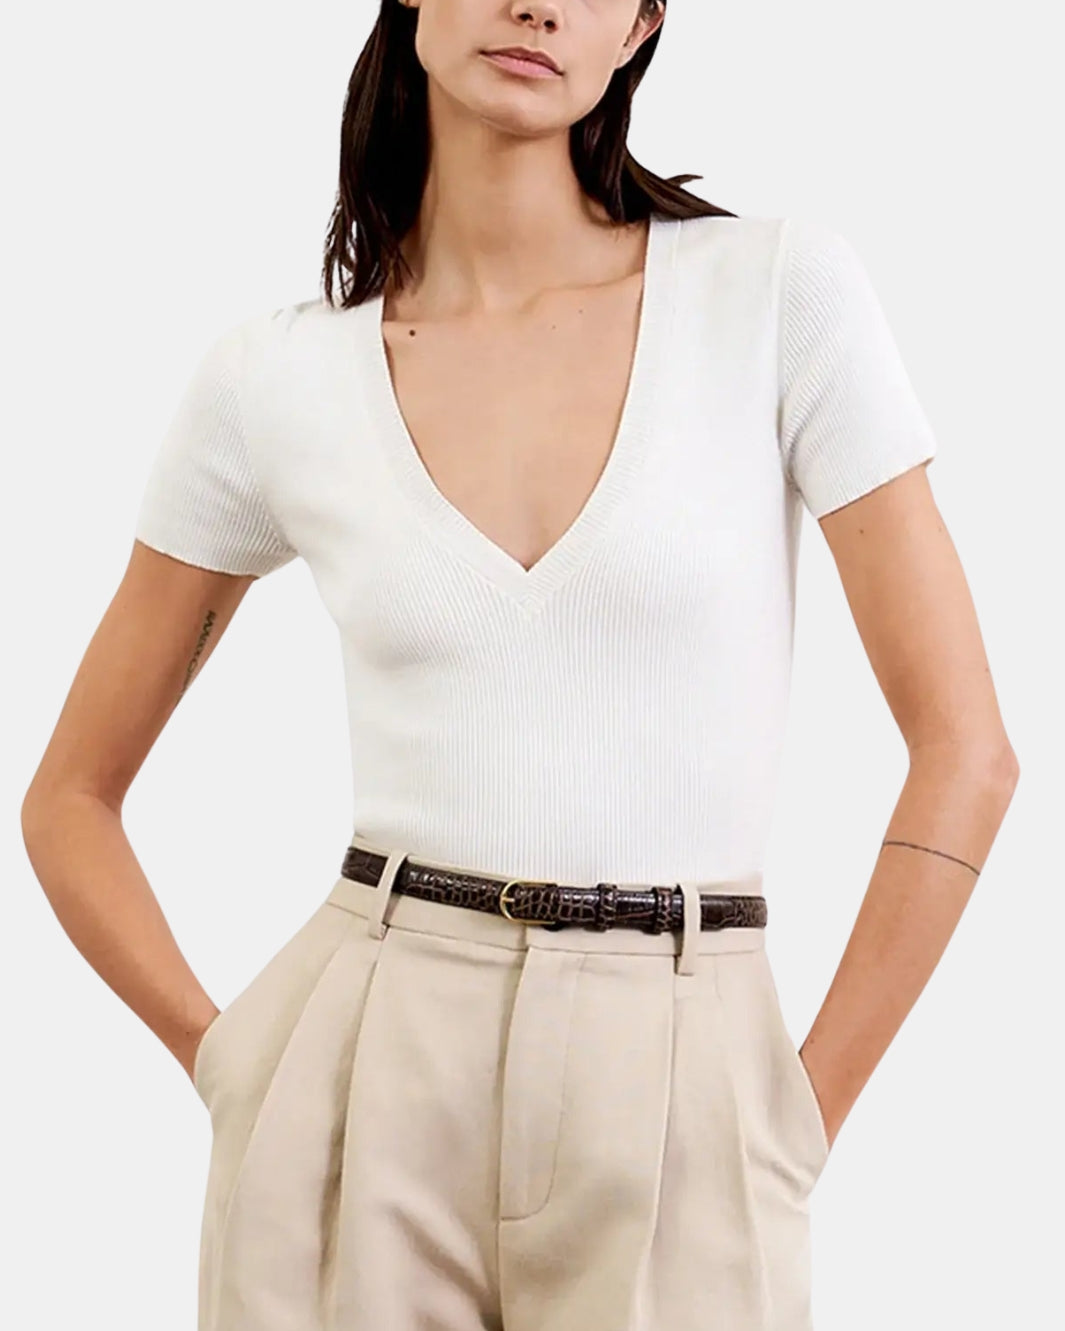 ITALIA COTTON RIBBED SWEATER IN IVORY - Romi Boutique